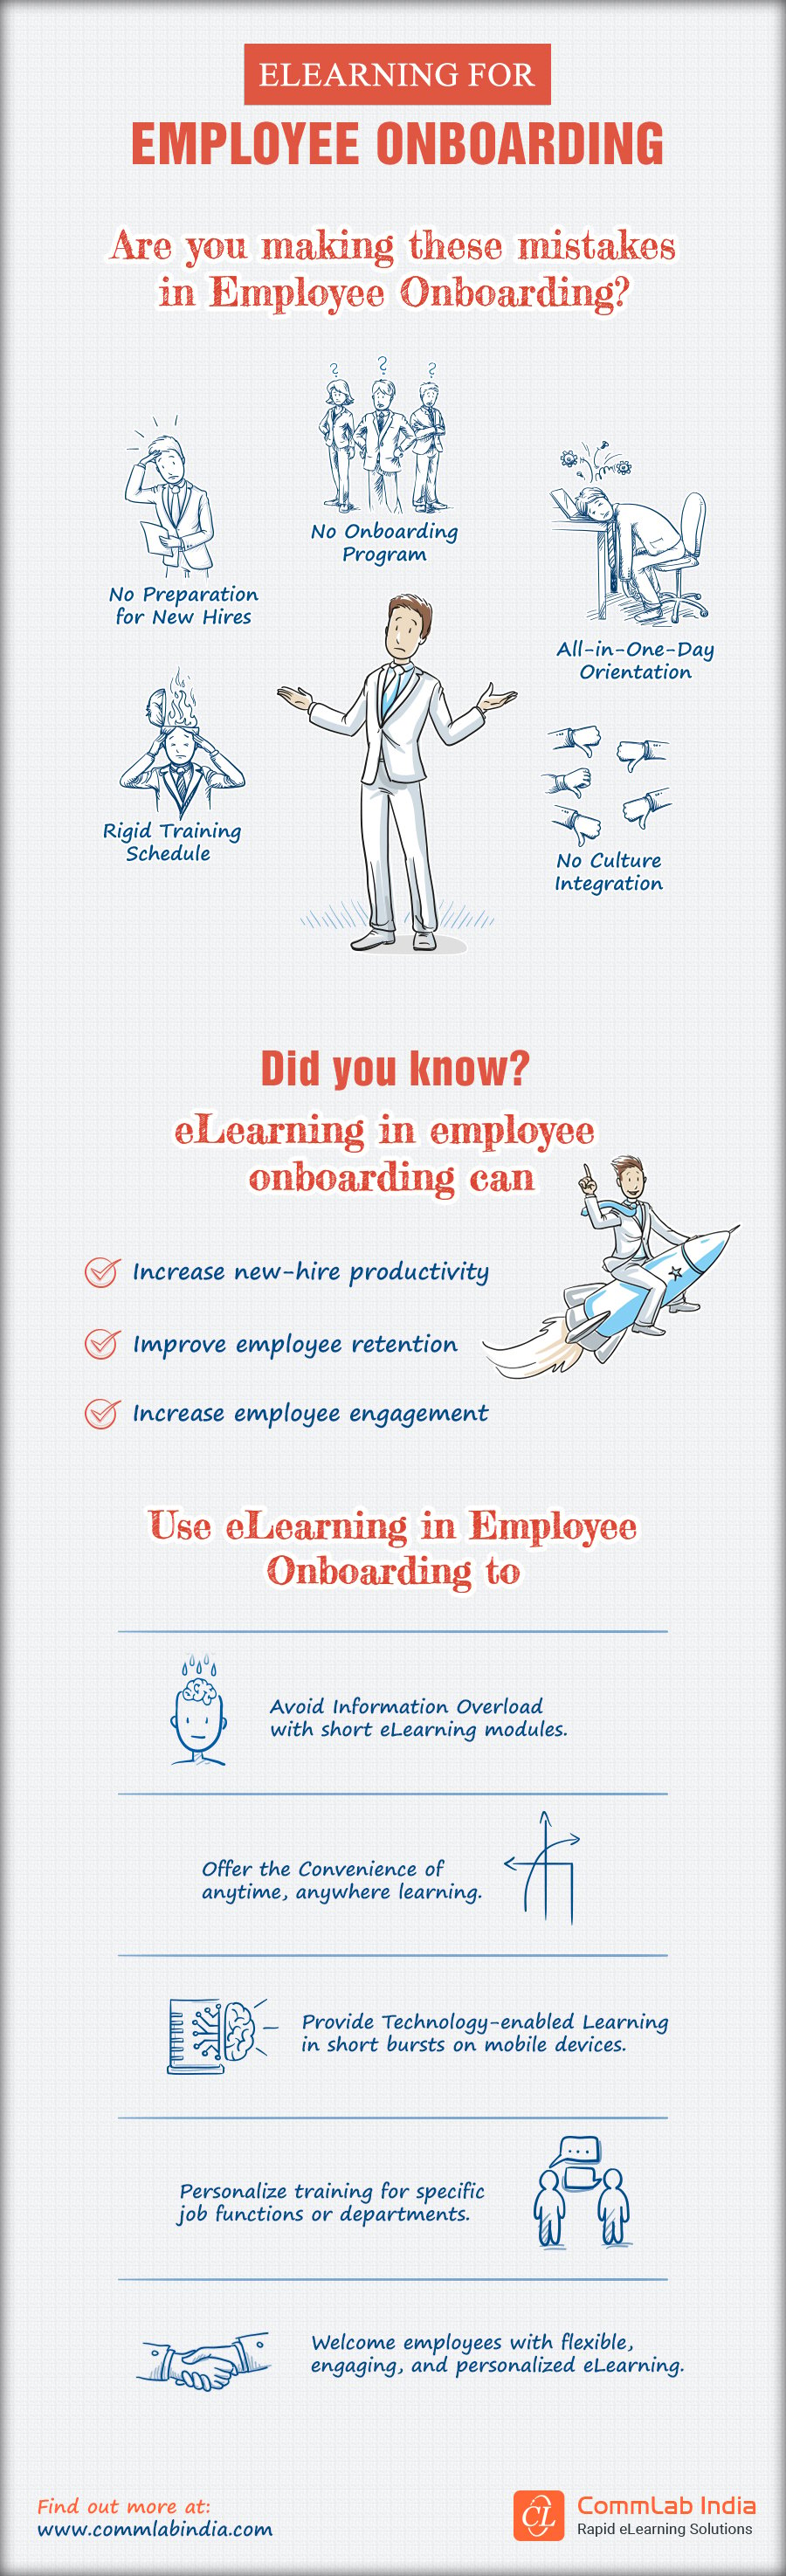 Why eLearning for Employee Onboarding? [Infographic]